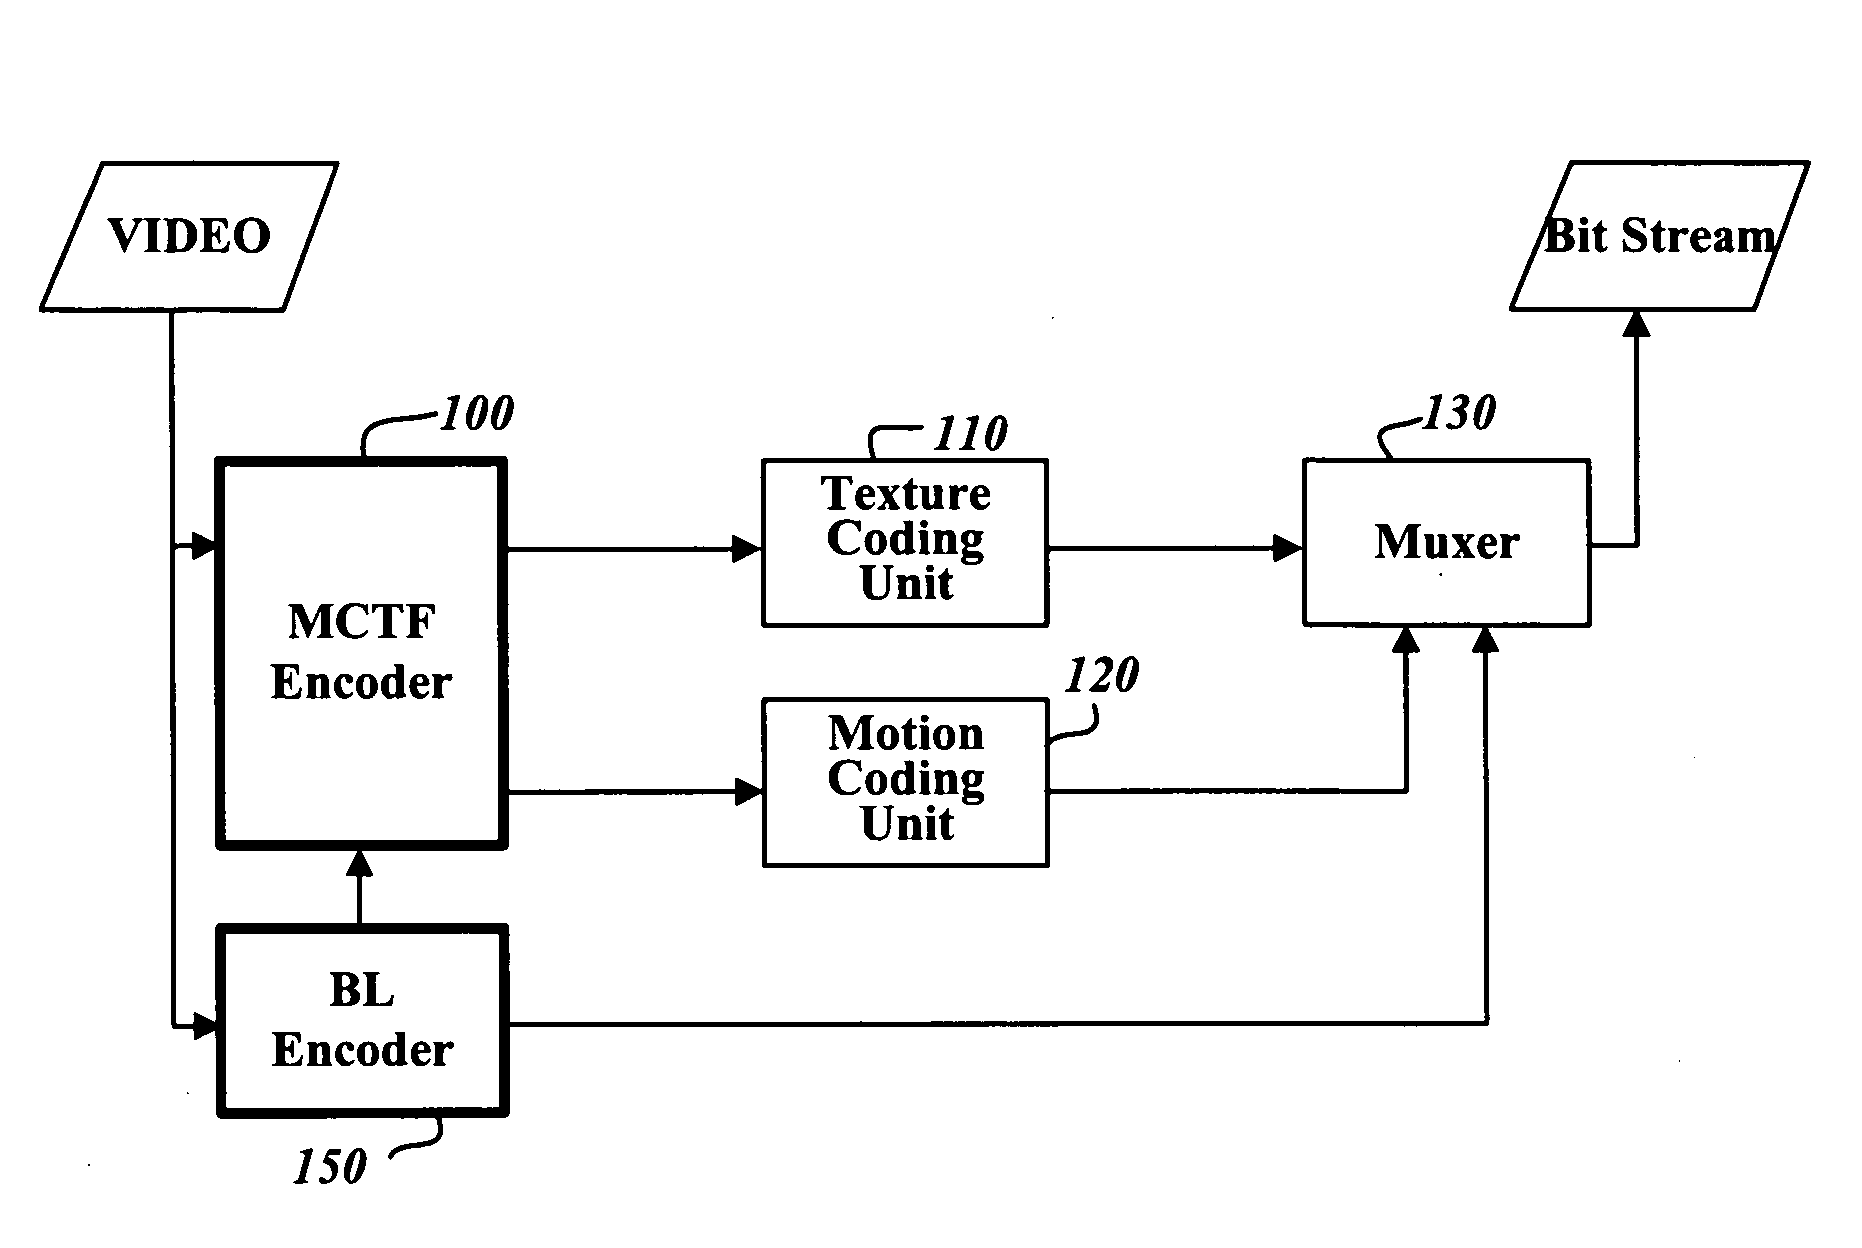 Method for encoding and decoding video signals